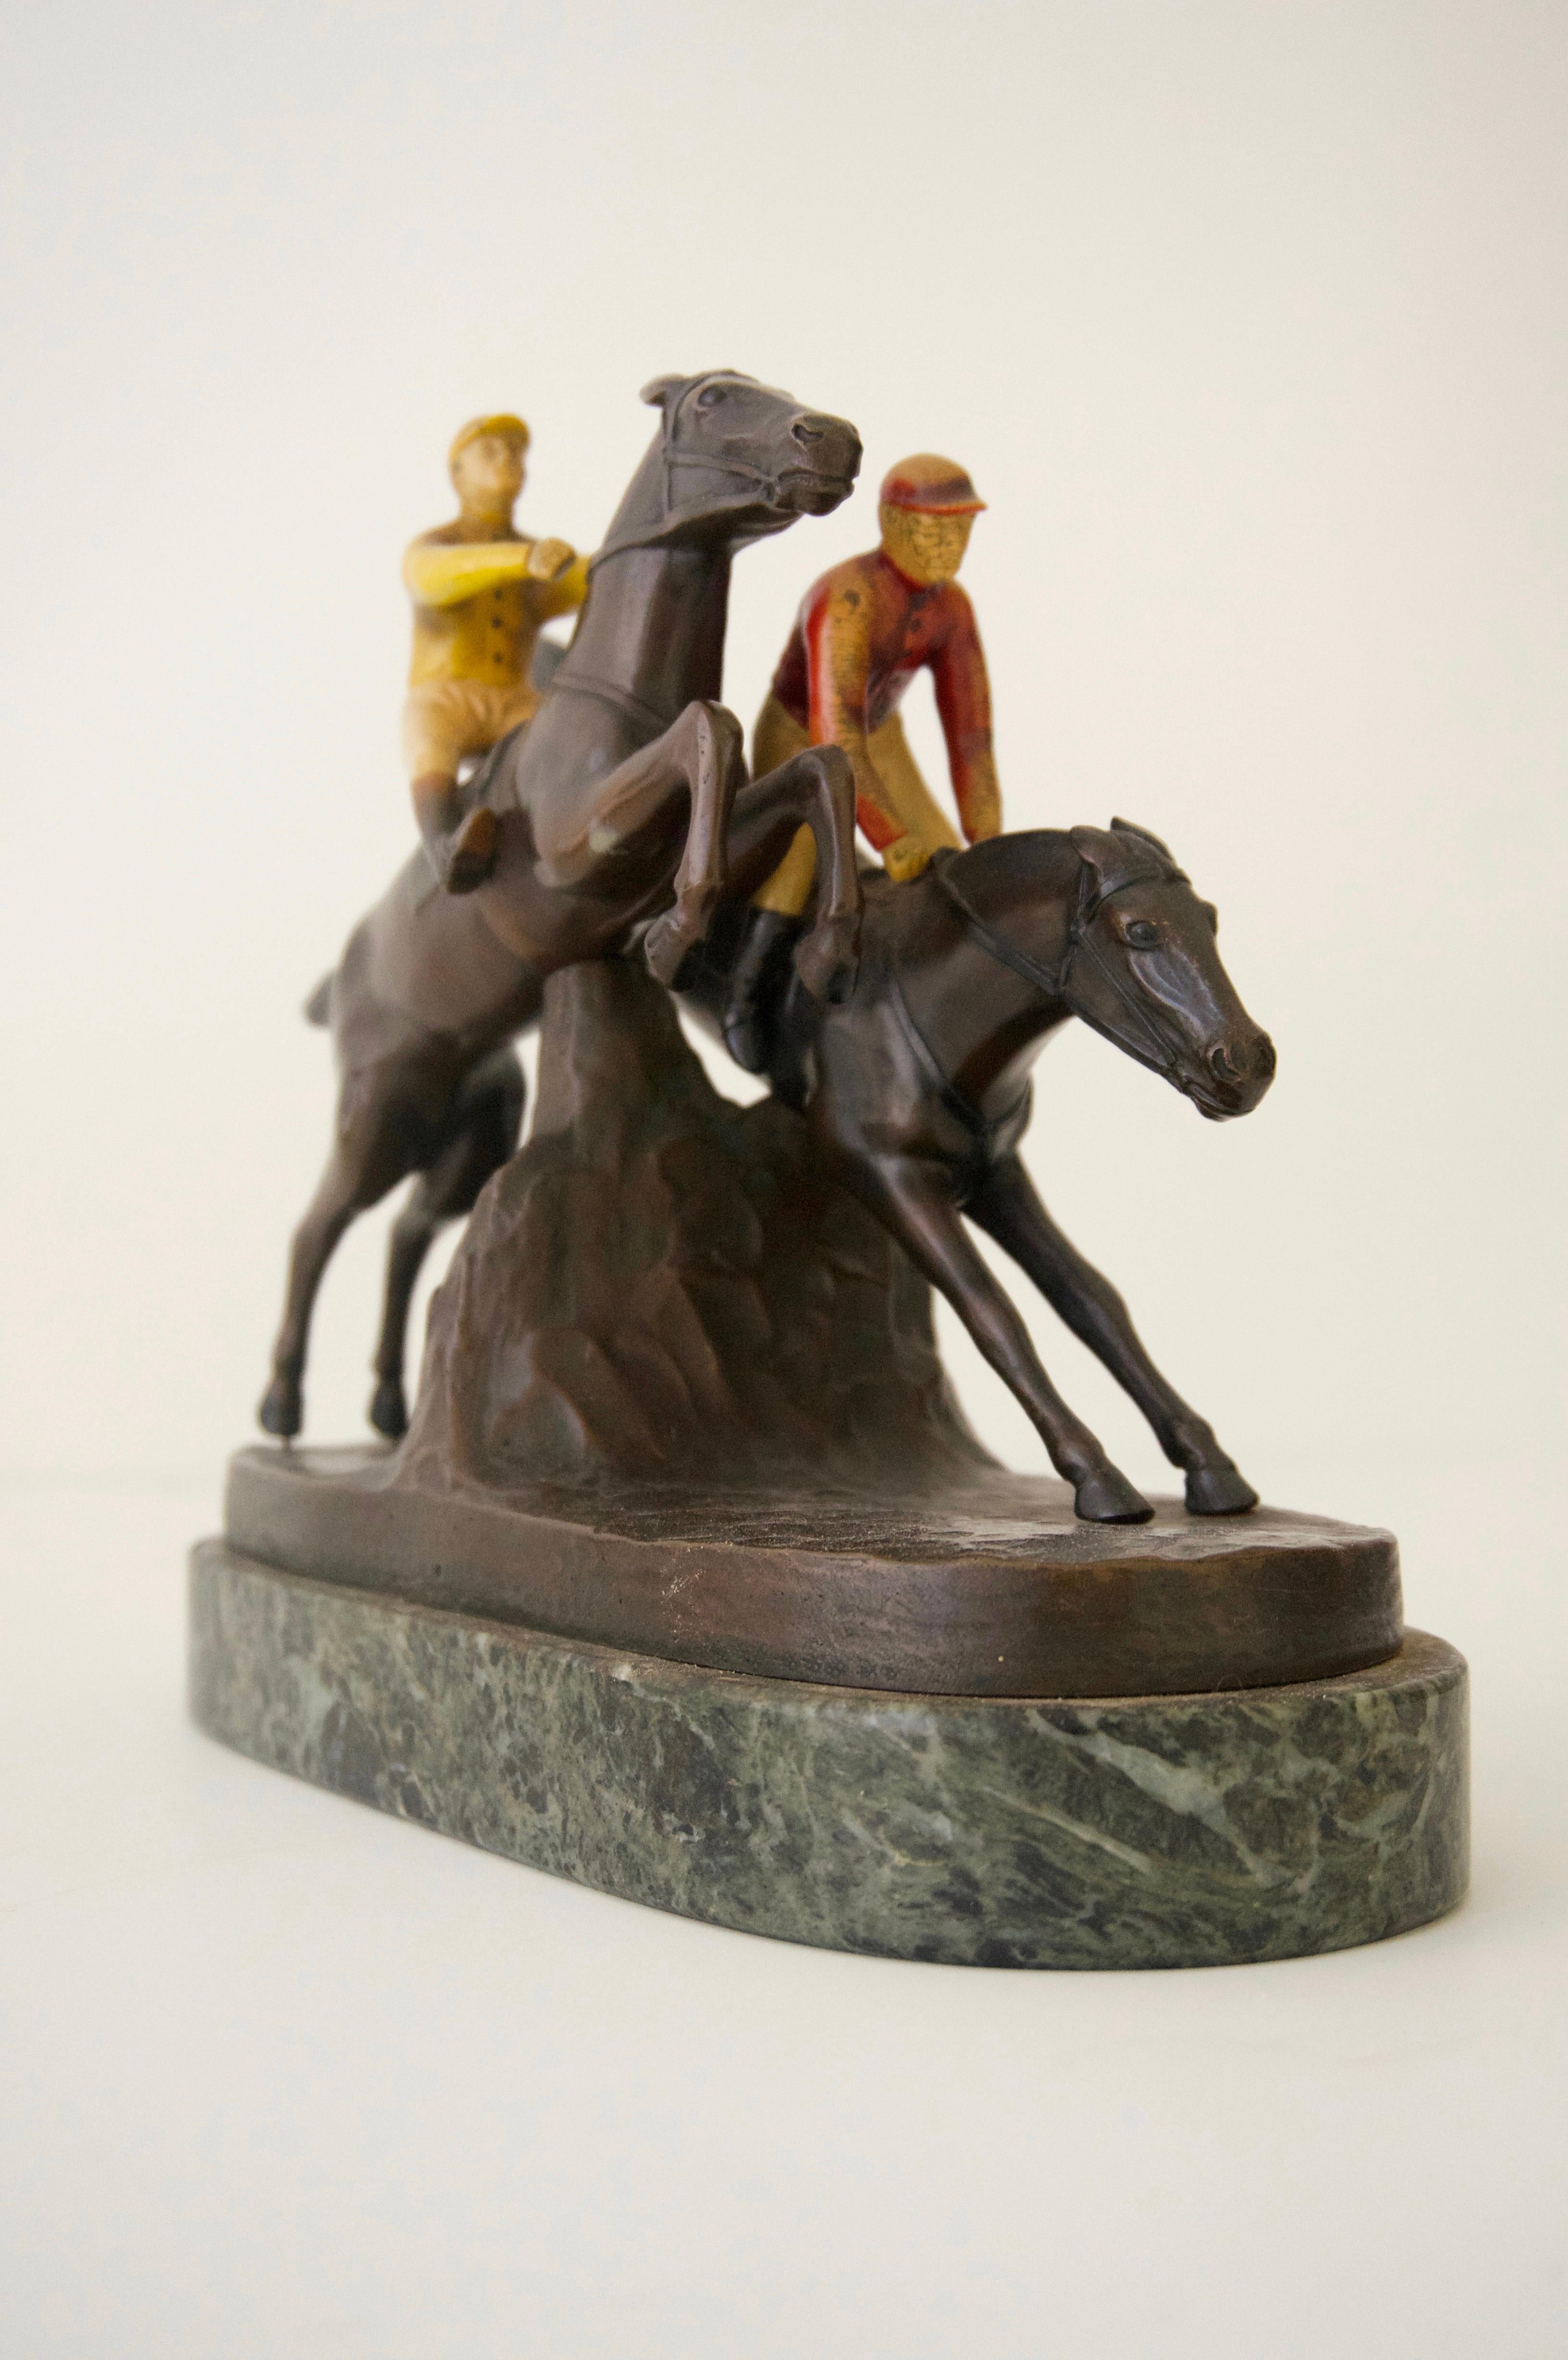 This stylish bronze equestrian sculpture dates to turn of the 19th century and was created by Hans Harders, and here Harders has captured the energy, speed and grace of the English steeple chase. 

Note: Signed HARDERS on the base (see